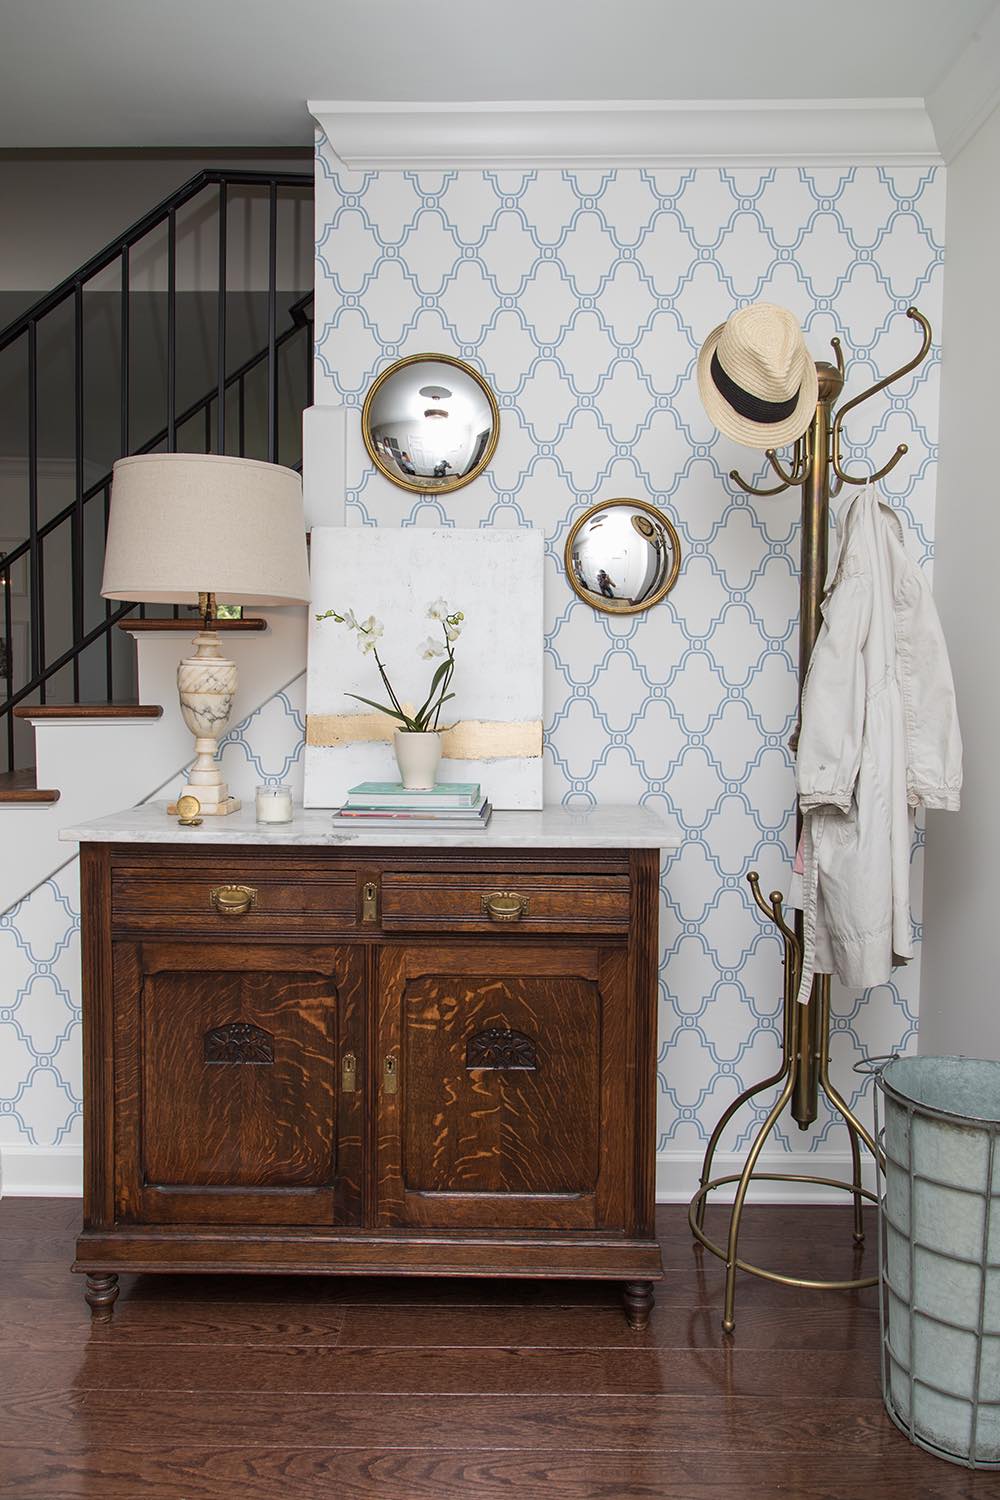 Antique dresser in entryway with blue wallpaper